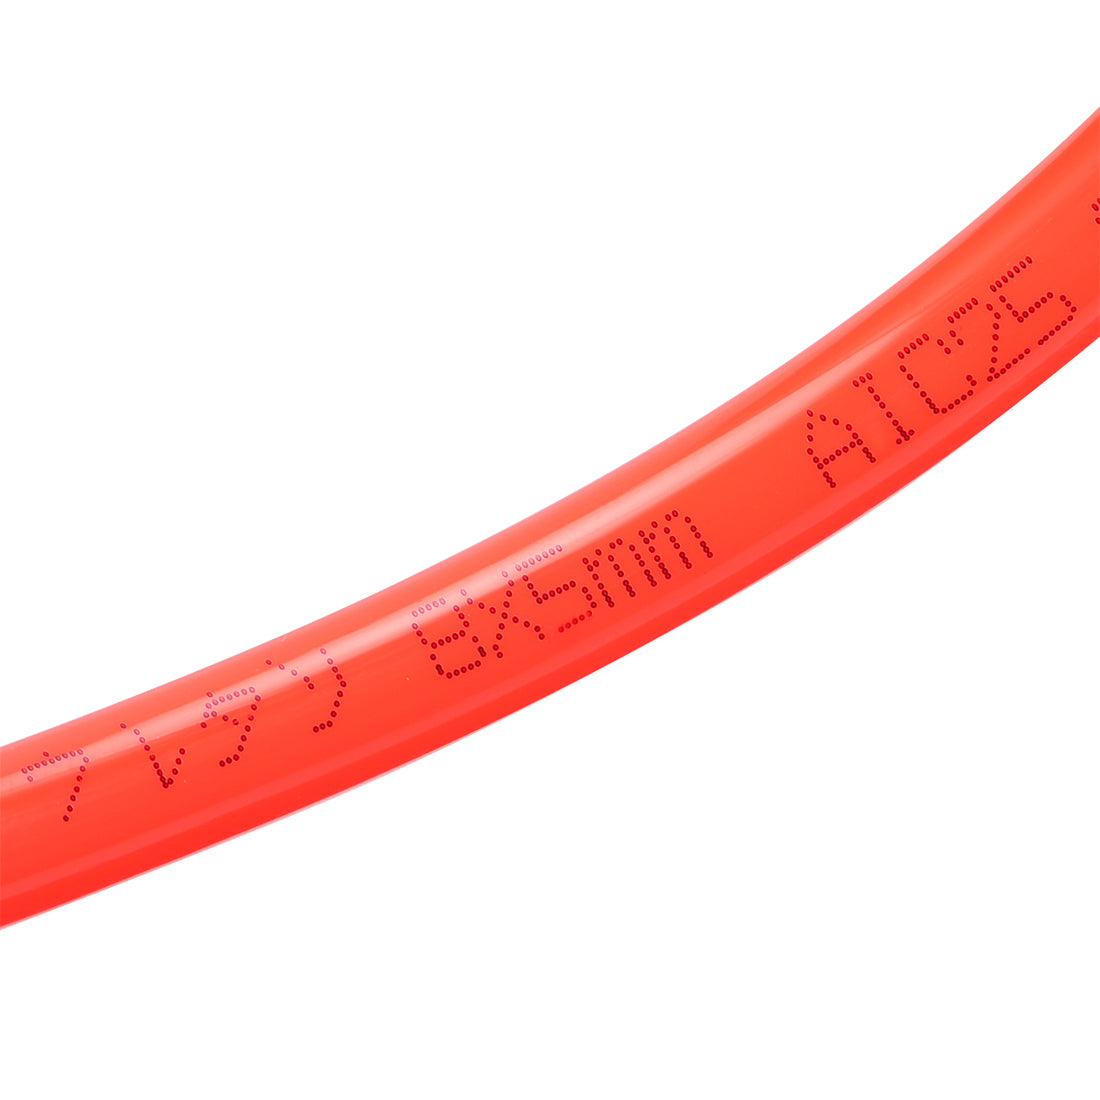 uxcell Uxcell Pneumatic Hose Tubing,8mm OD 5mm ID,Polyurethane PU Air Hose Pipe Tube,2 Meter 6.56ft,Red